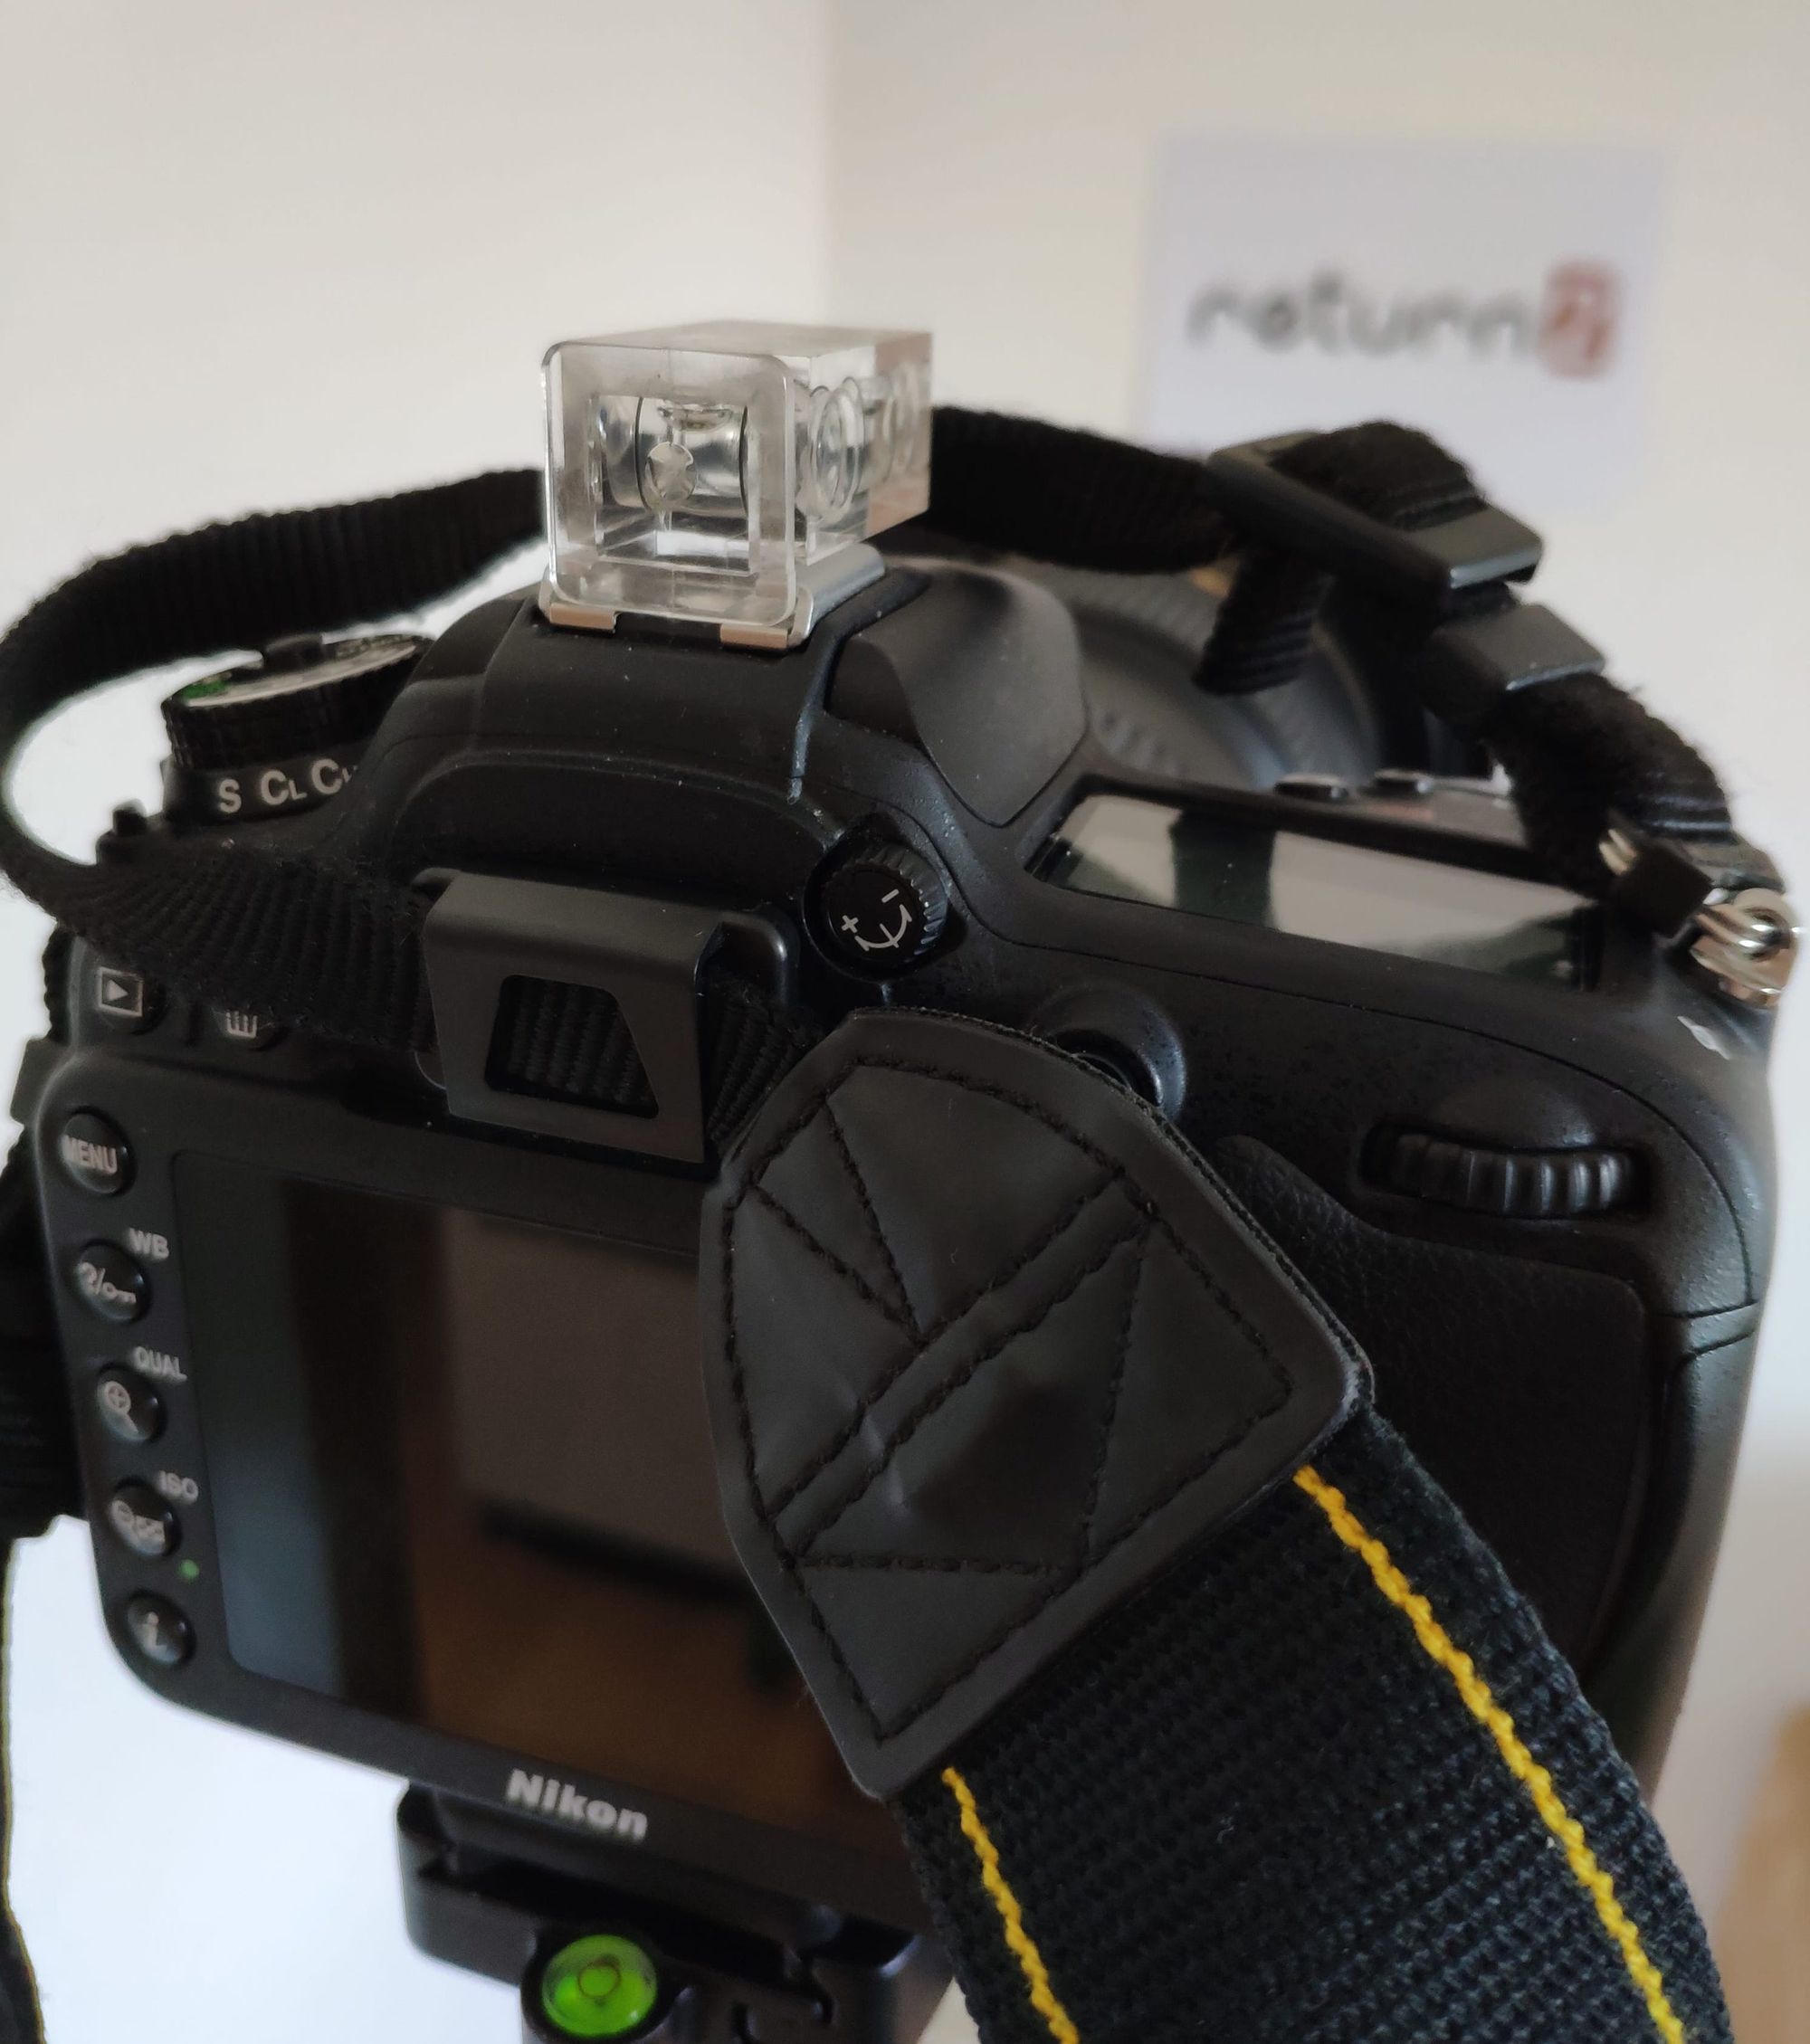 A Nikon DSLR camera with an eyepiece caps on the viewport